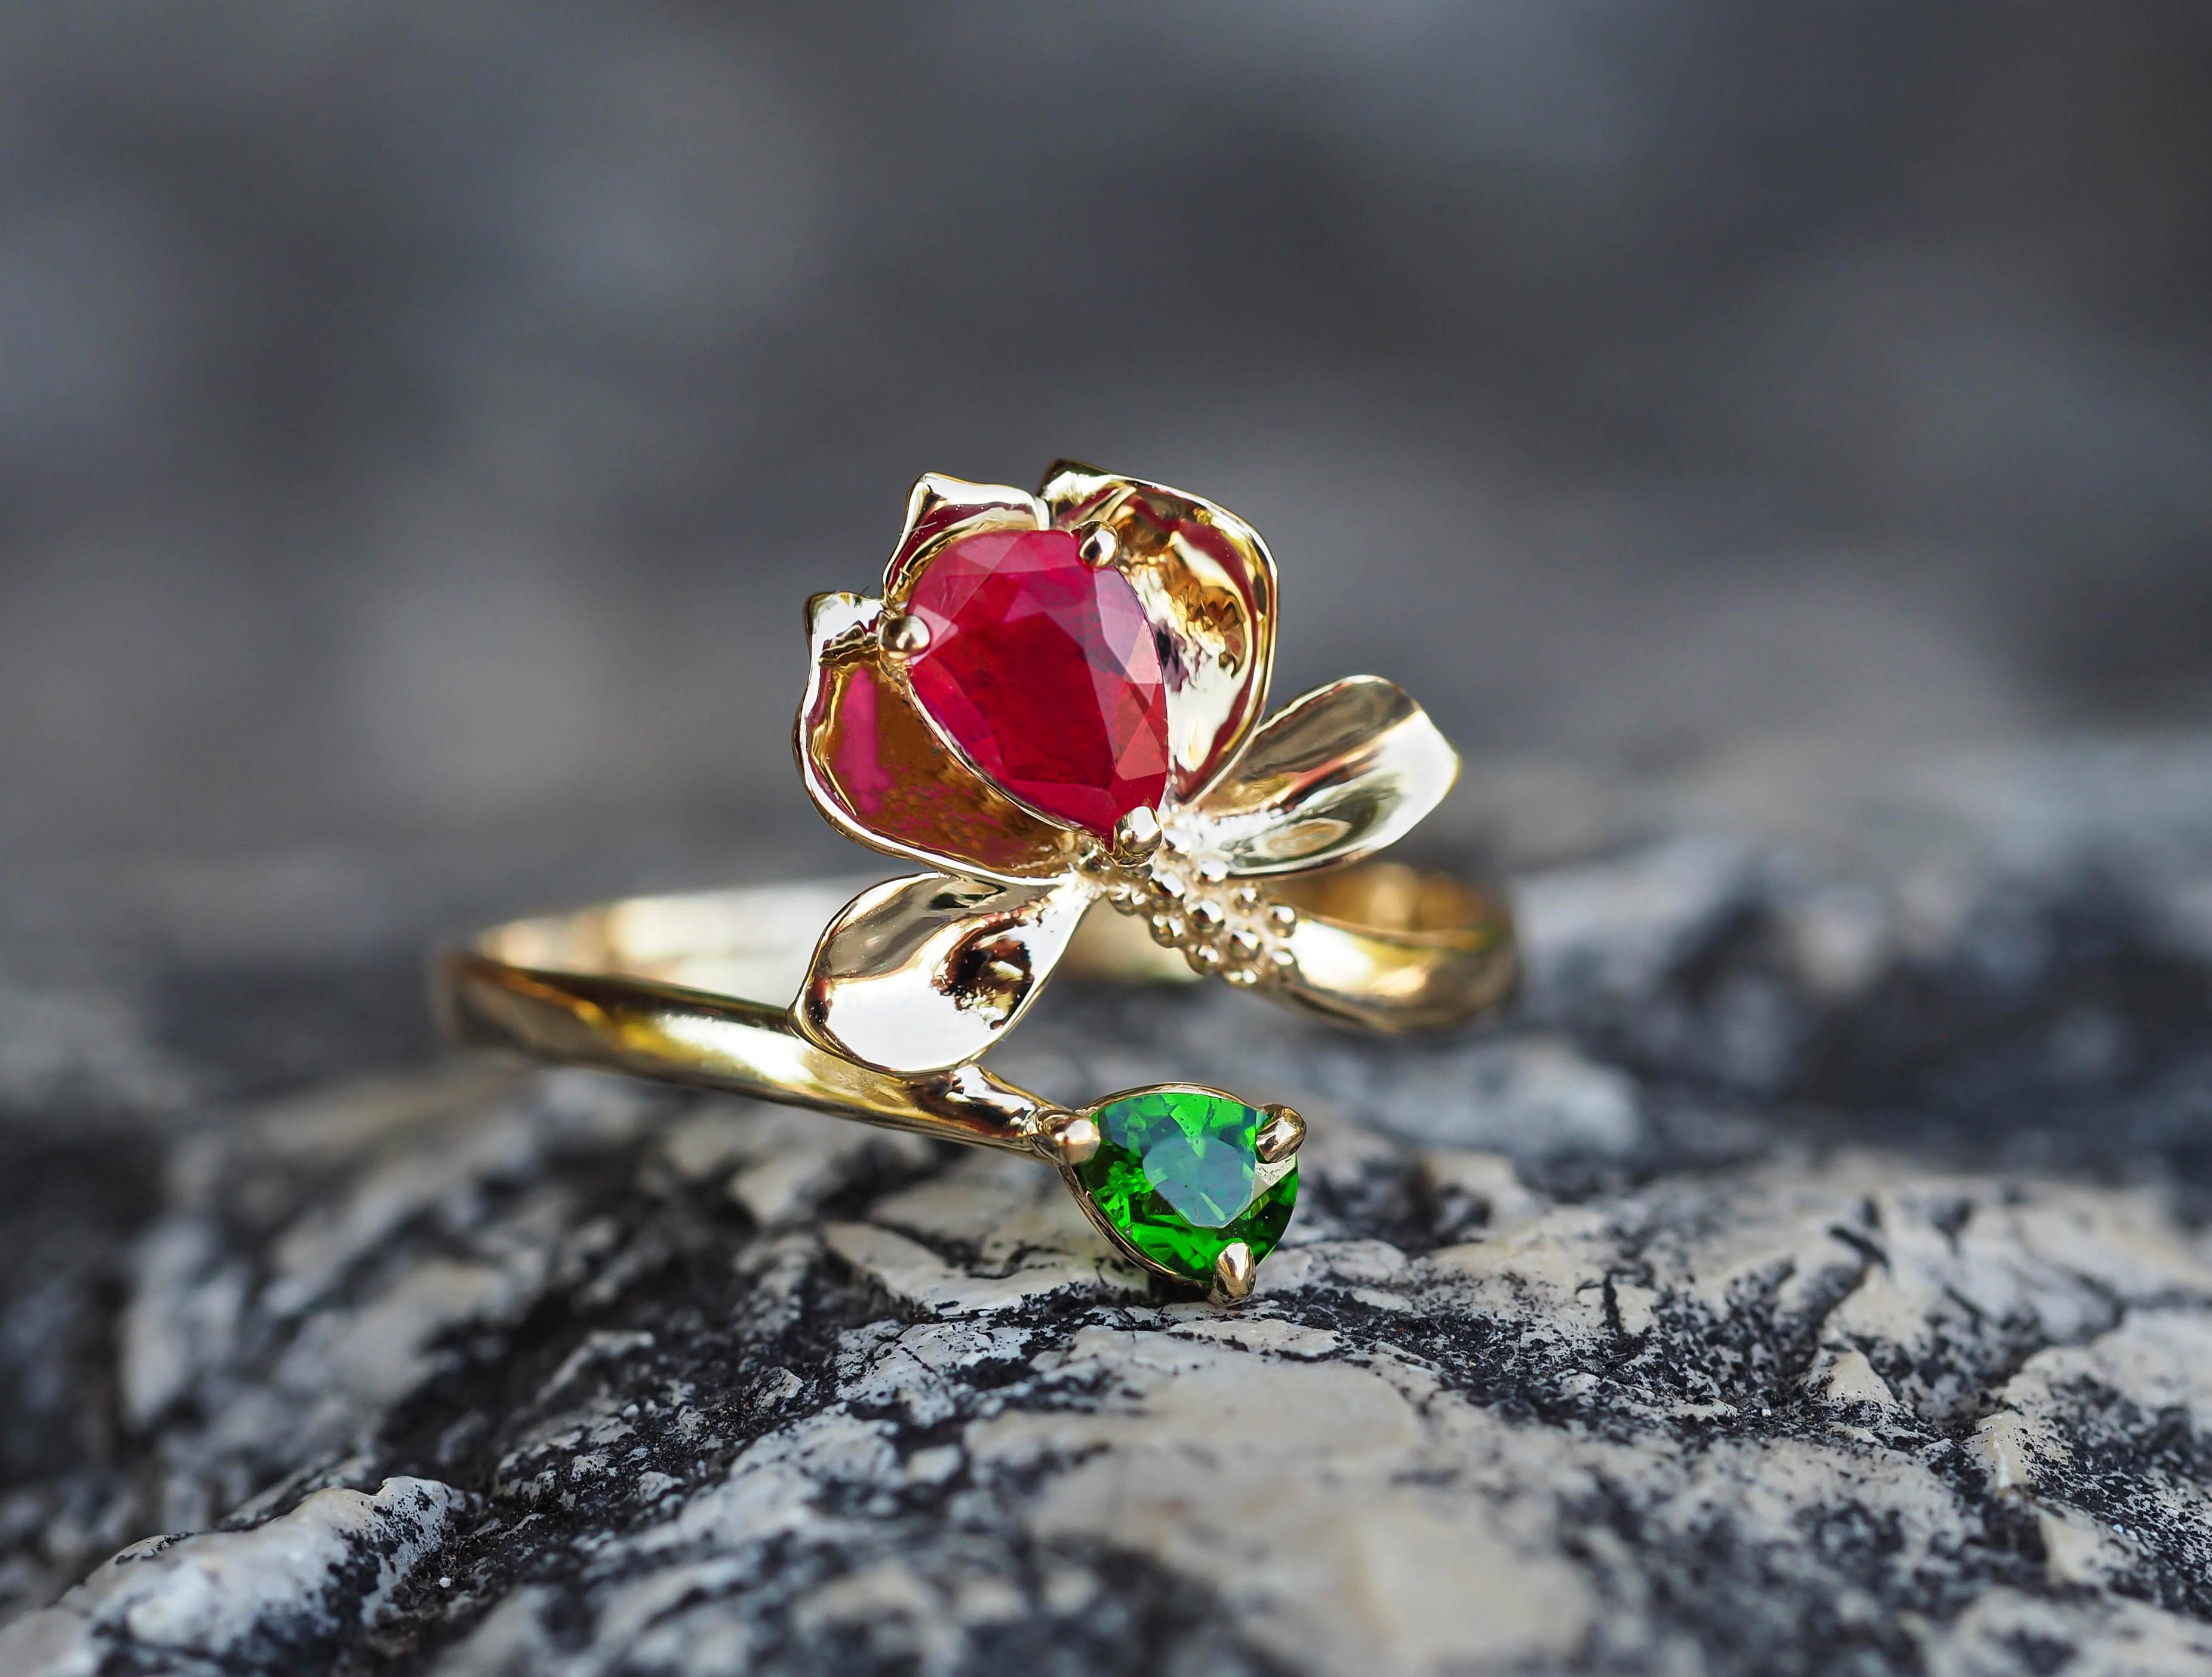 For Sale:  14 K Gold Ring with Ruby and Chrome Diopside. Water Lily Flower Gold Ring! 9